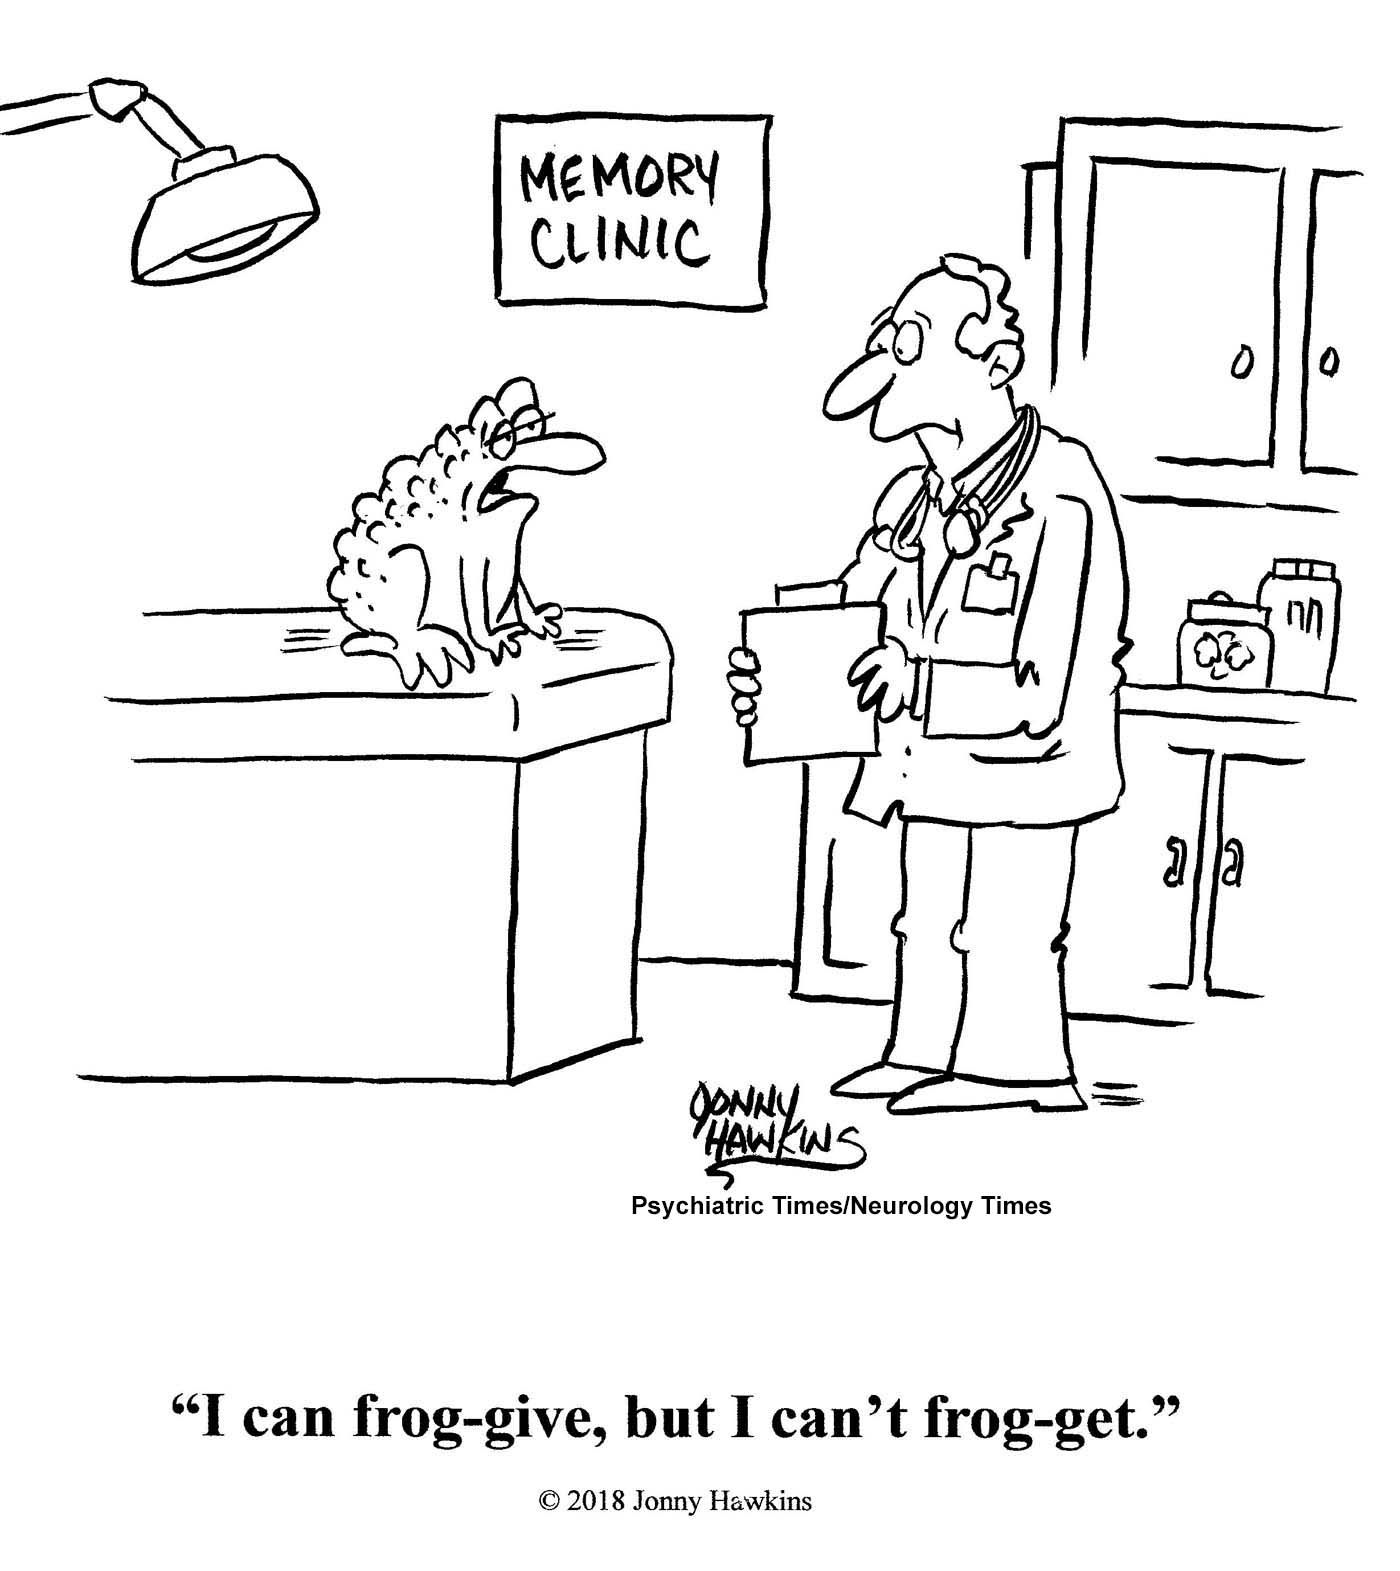 psychiatry comic, forgiveness, frog, forget